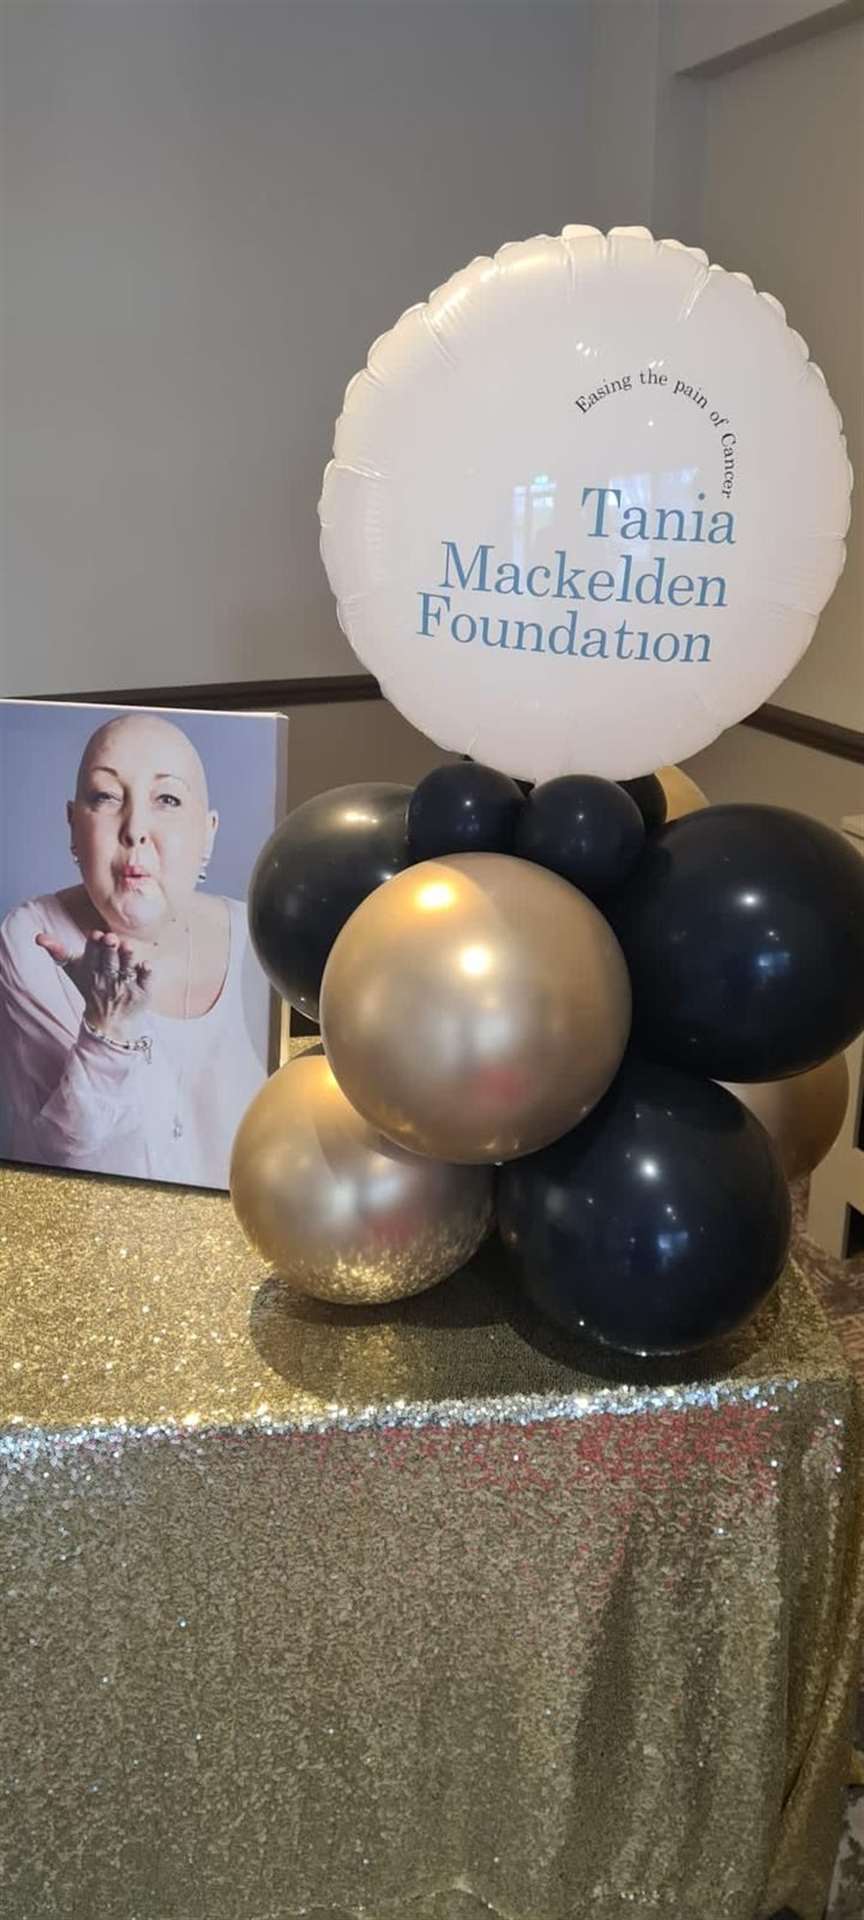 The Tania Mackelden Foundation aims to help families who are in the same boat Tom and his family once were